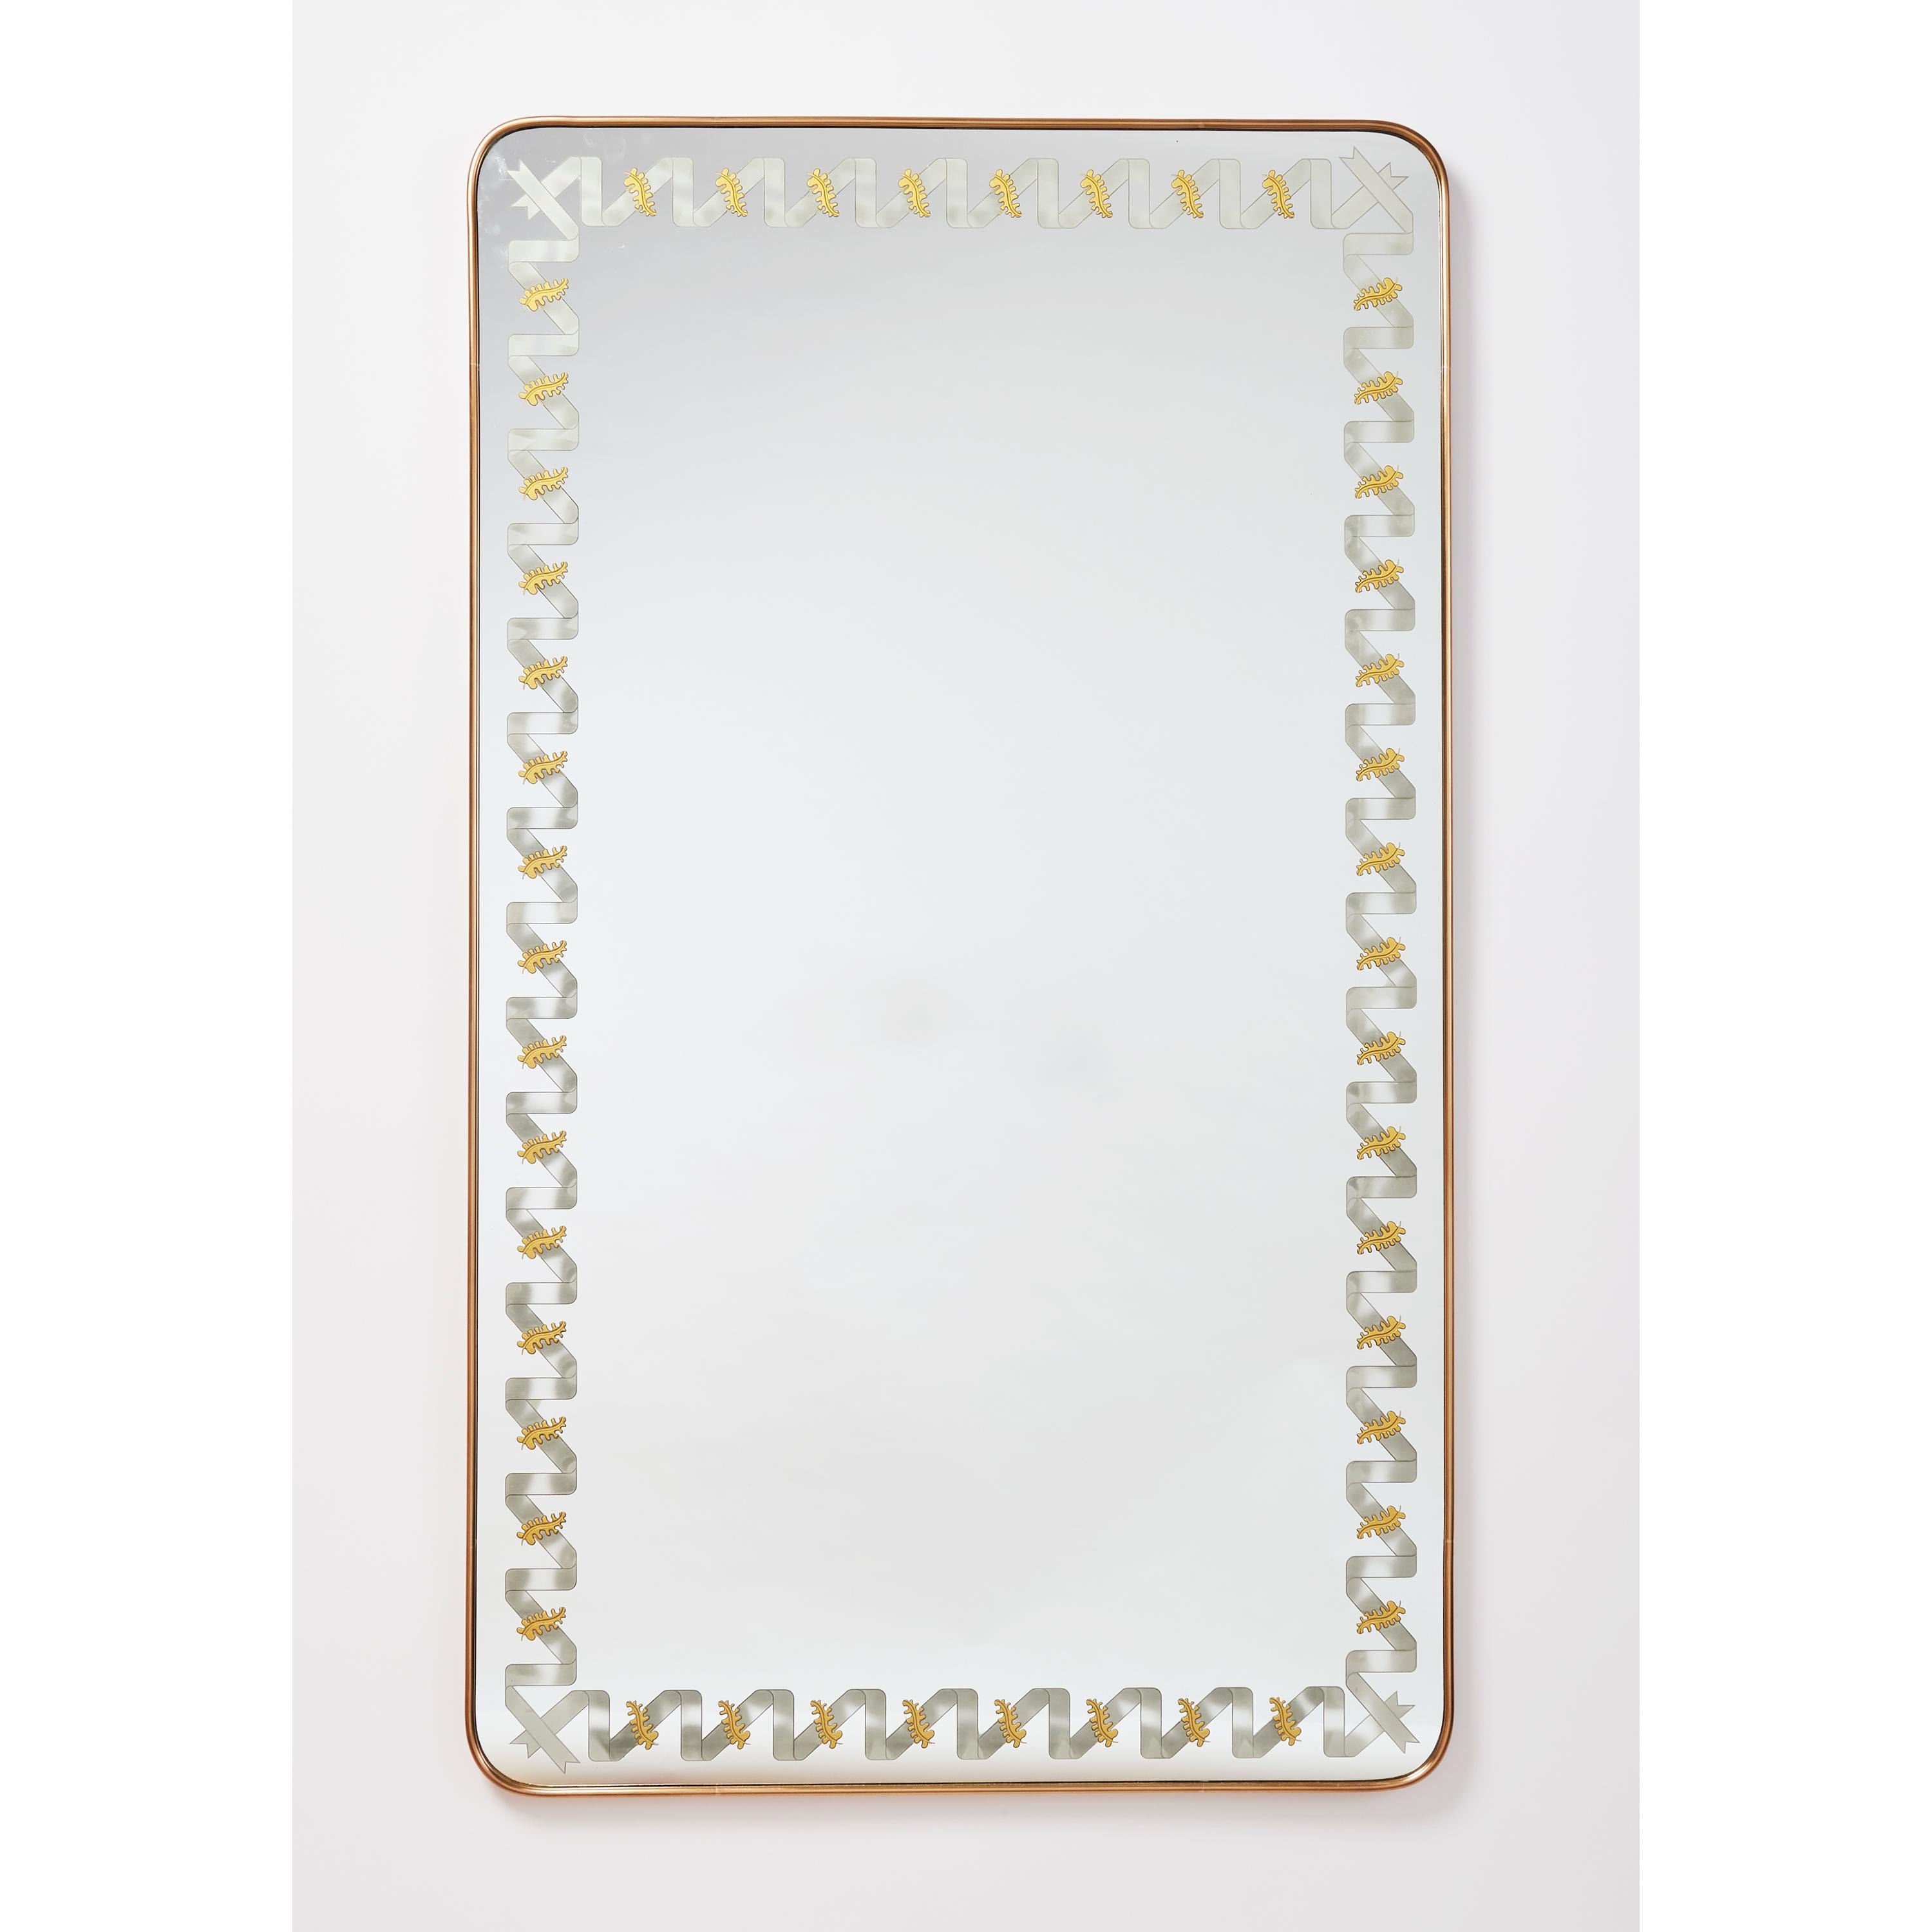 Giovanni Gariboldi ( 1908-1971 ), attr. to,
A tall and handsome rectangular mirror with rounded corners and brass frame, beautifully engraved ribbon border with delicate shading ornamented with a repeated gilt oak leaf motif.
Italy,